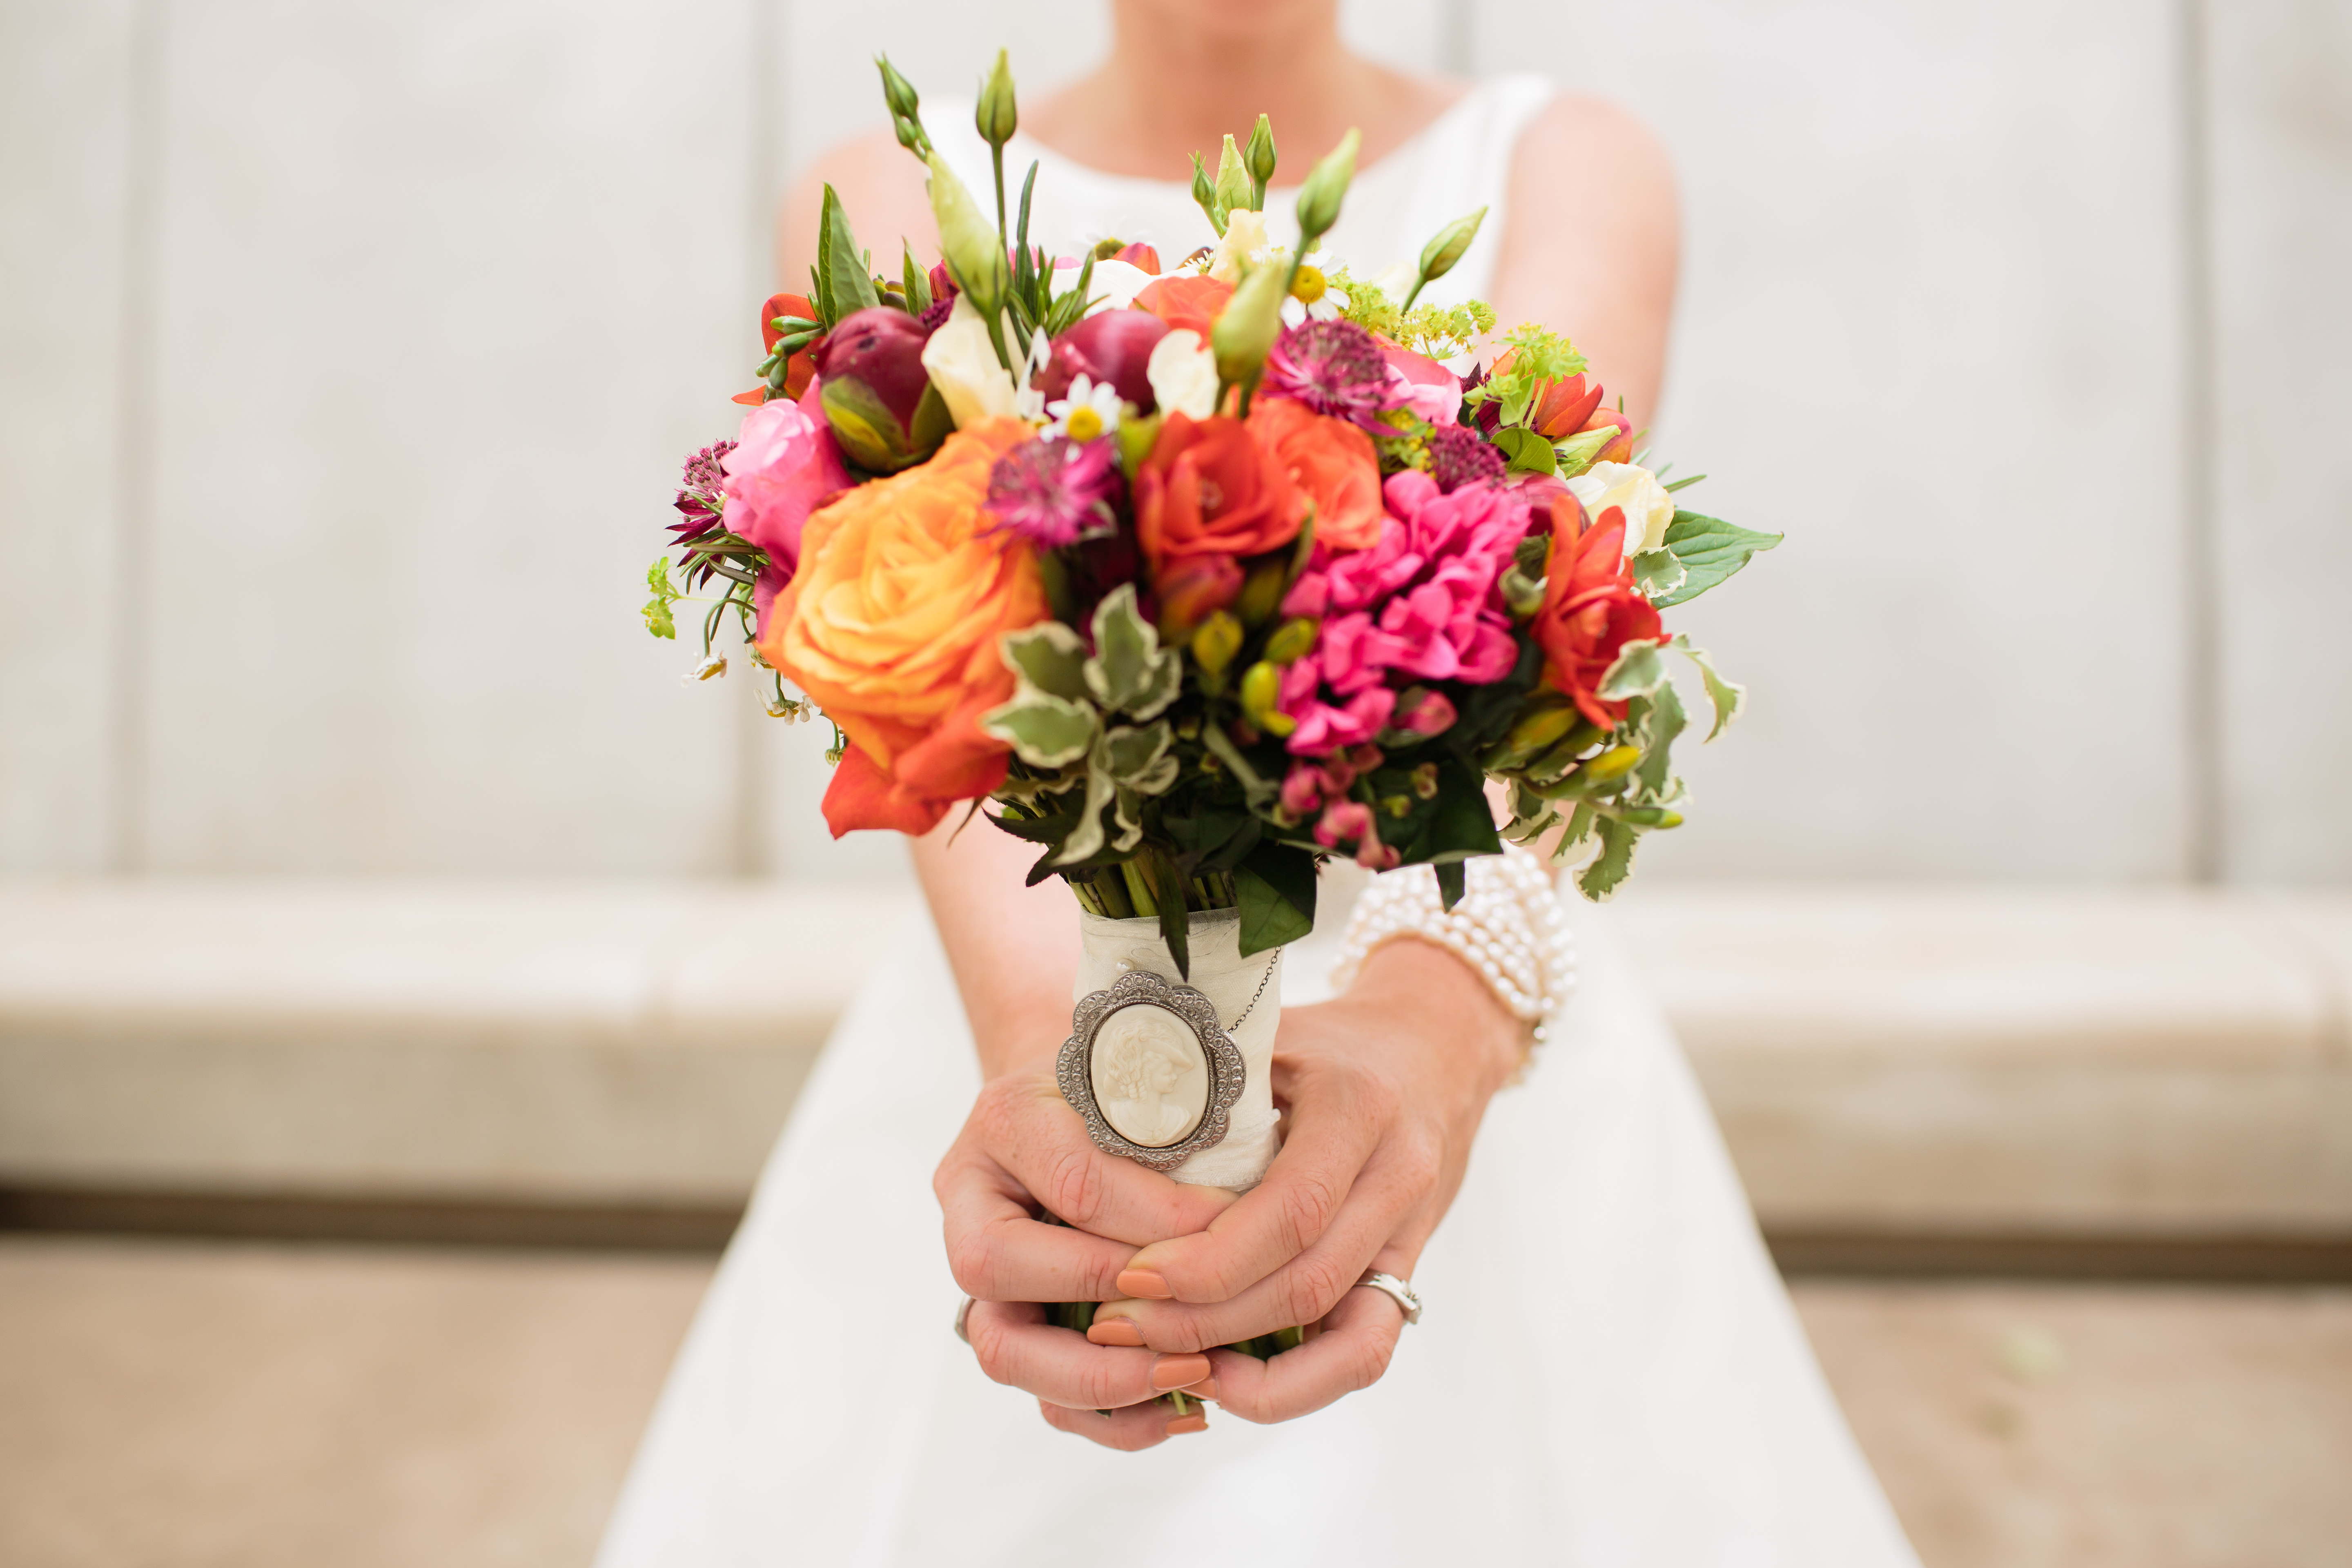 A bride holding a bouquet of orange and pink flowers.